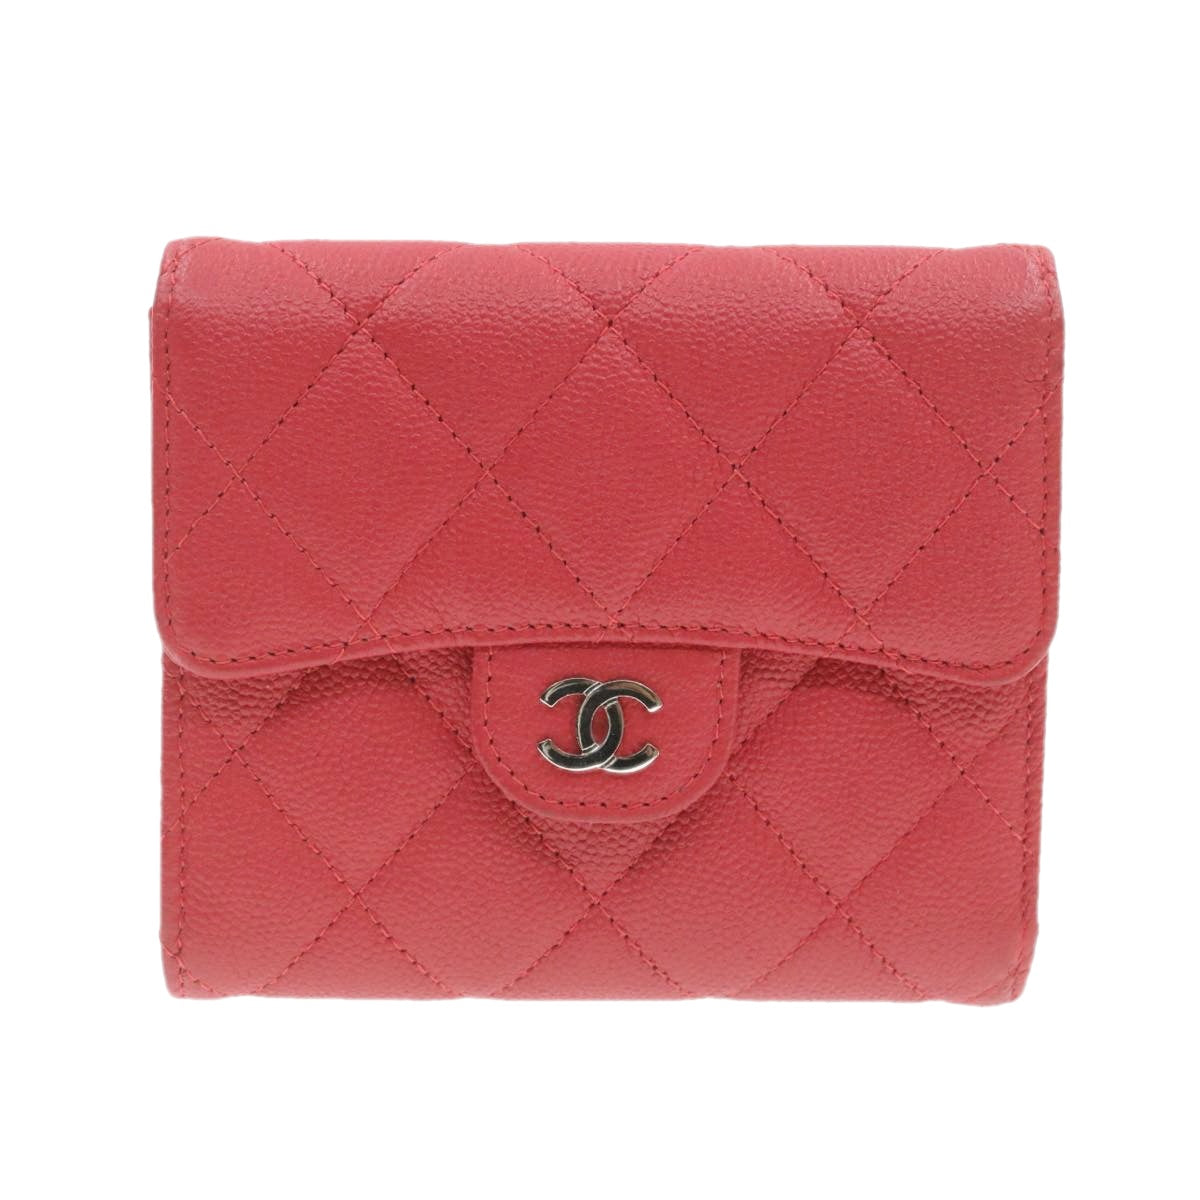 CHANEL Caviar Skin Matelasse Wallet Pink Red CC Auth 18734A - 0